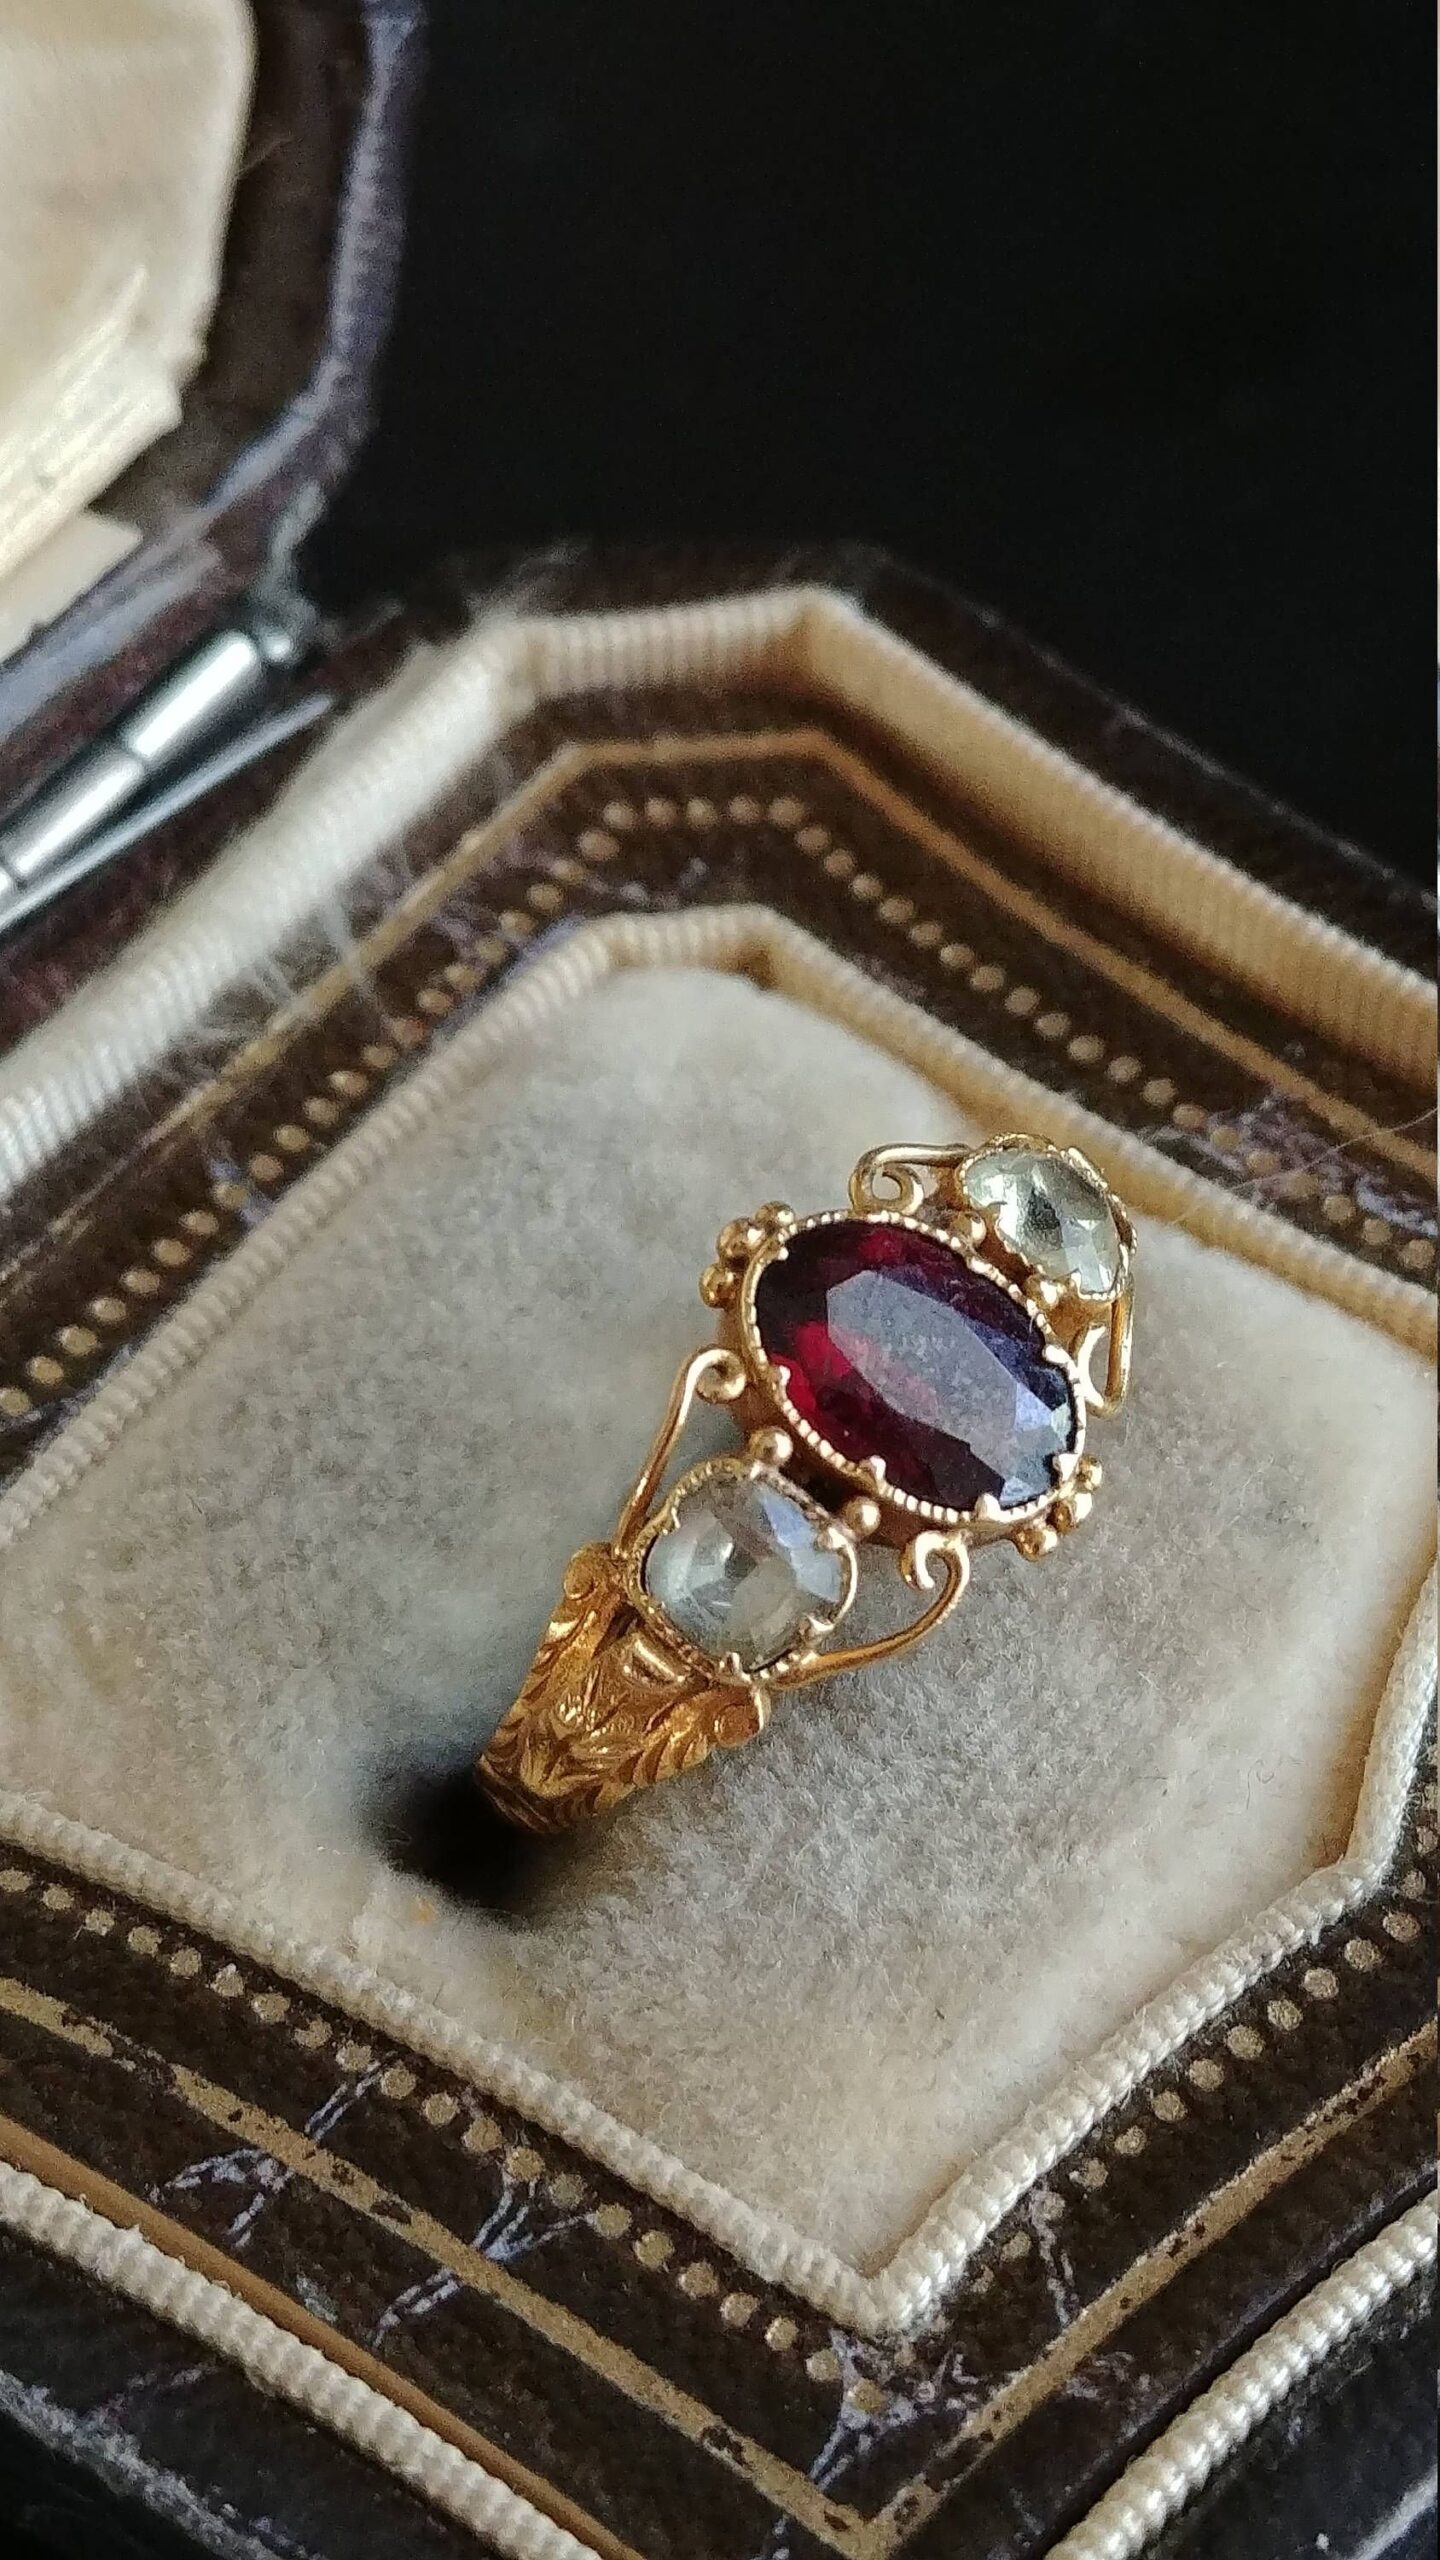 Exploring the History and Beauty of
Antique Rings